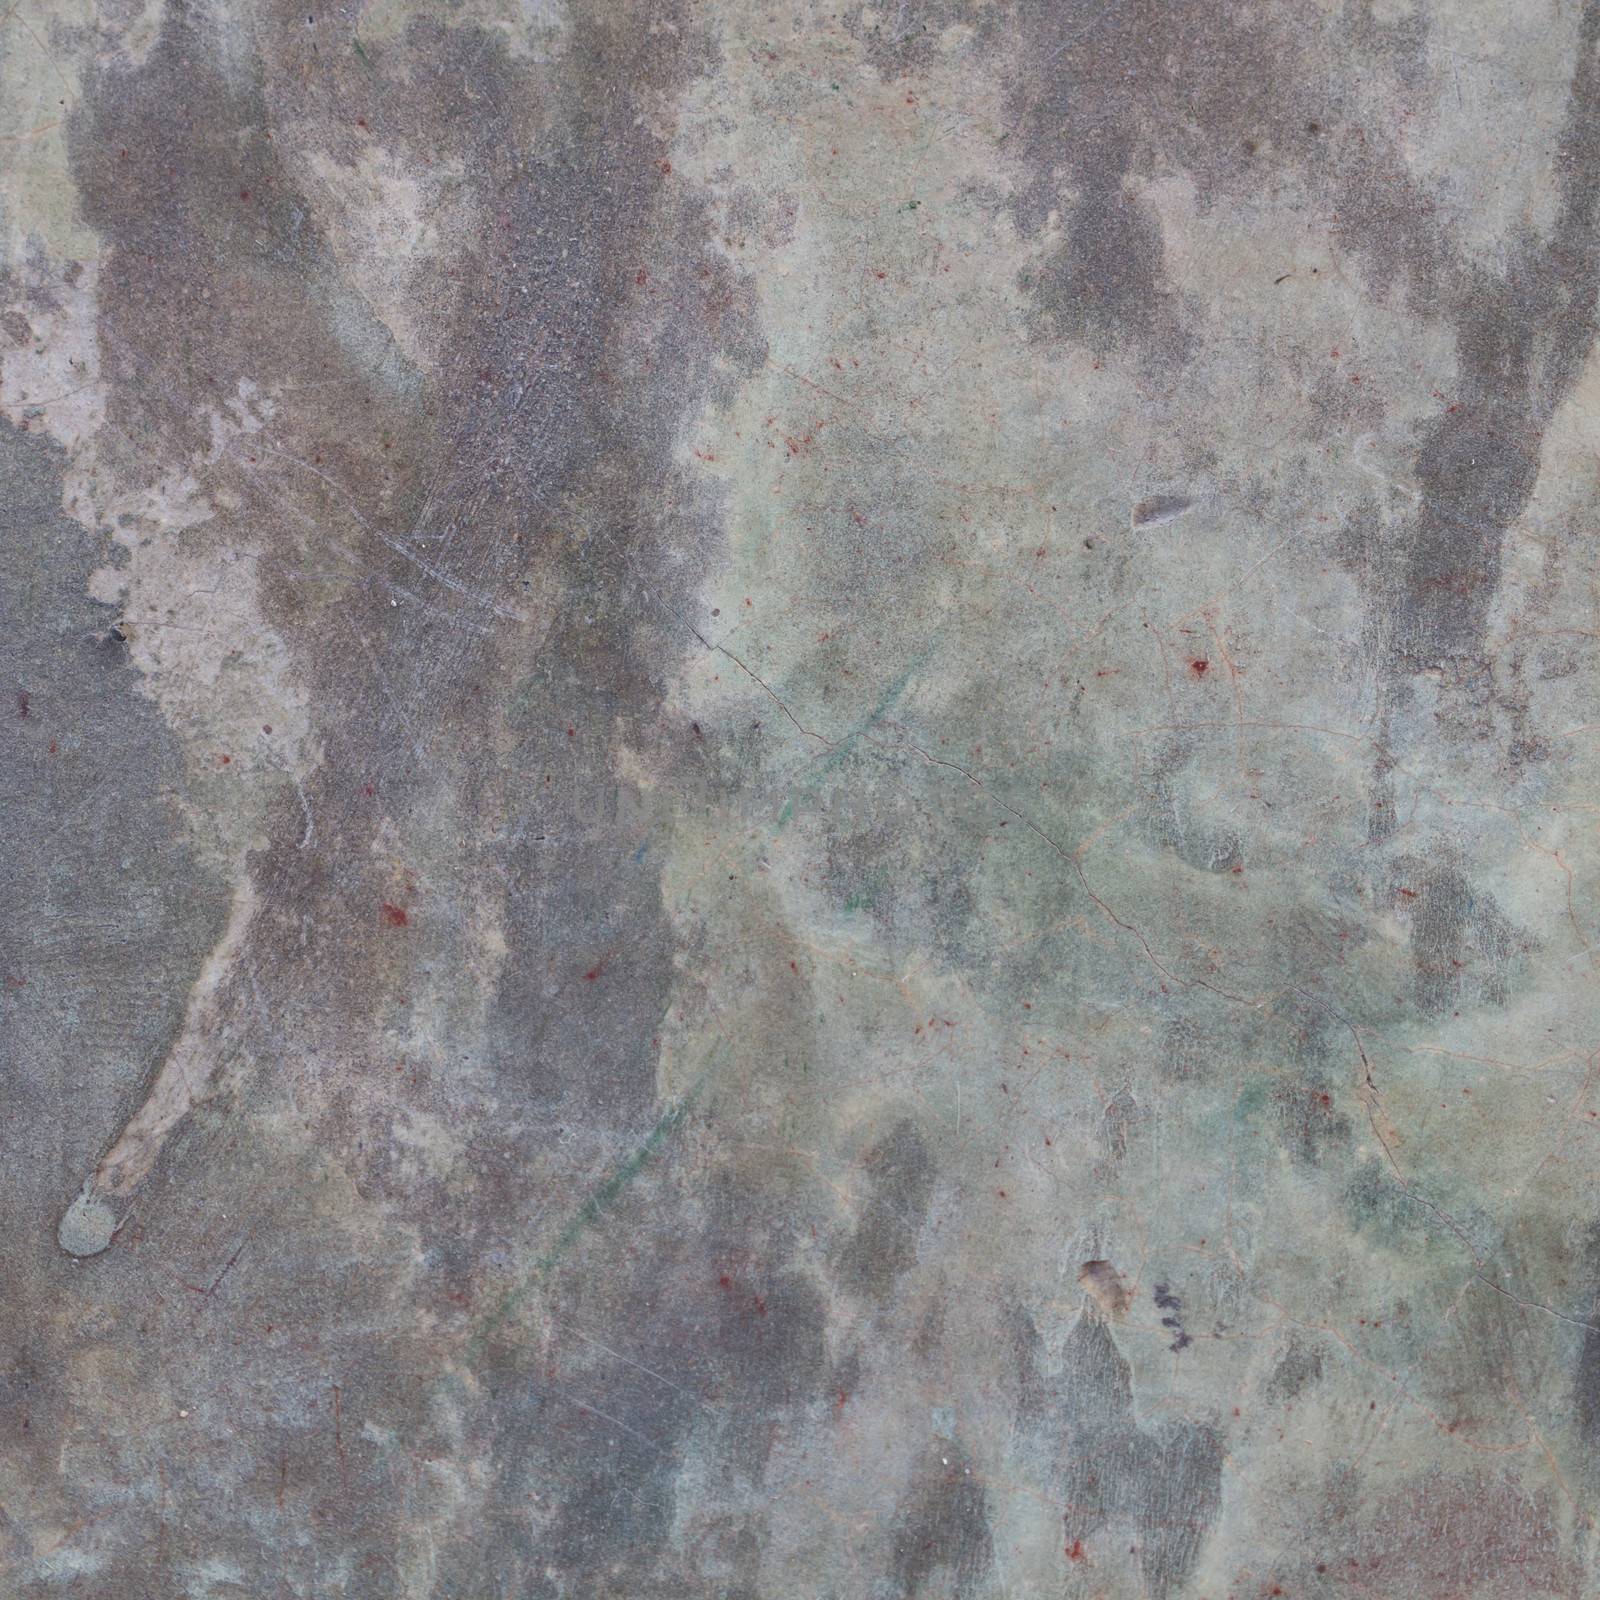 white plastered wall background or texture